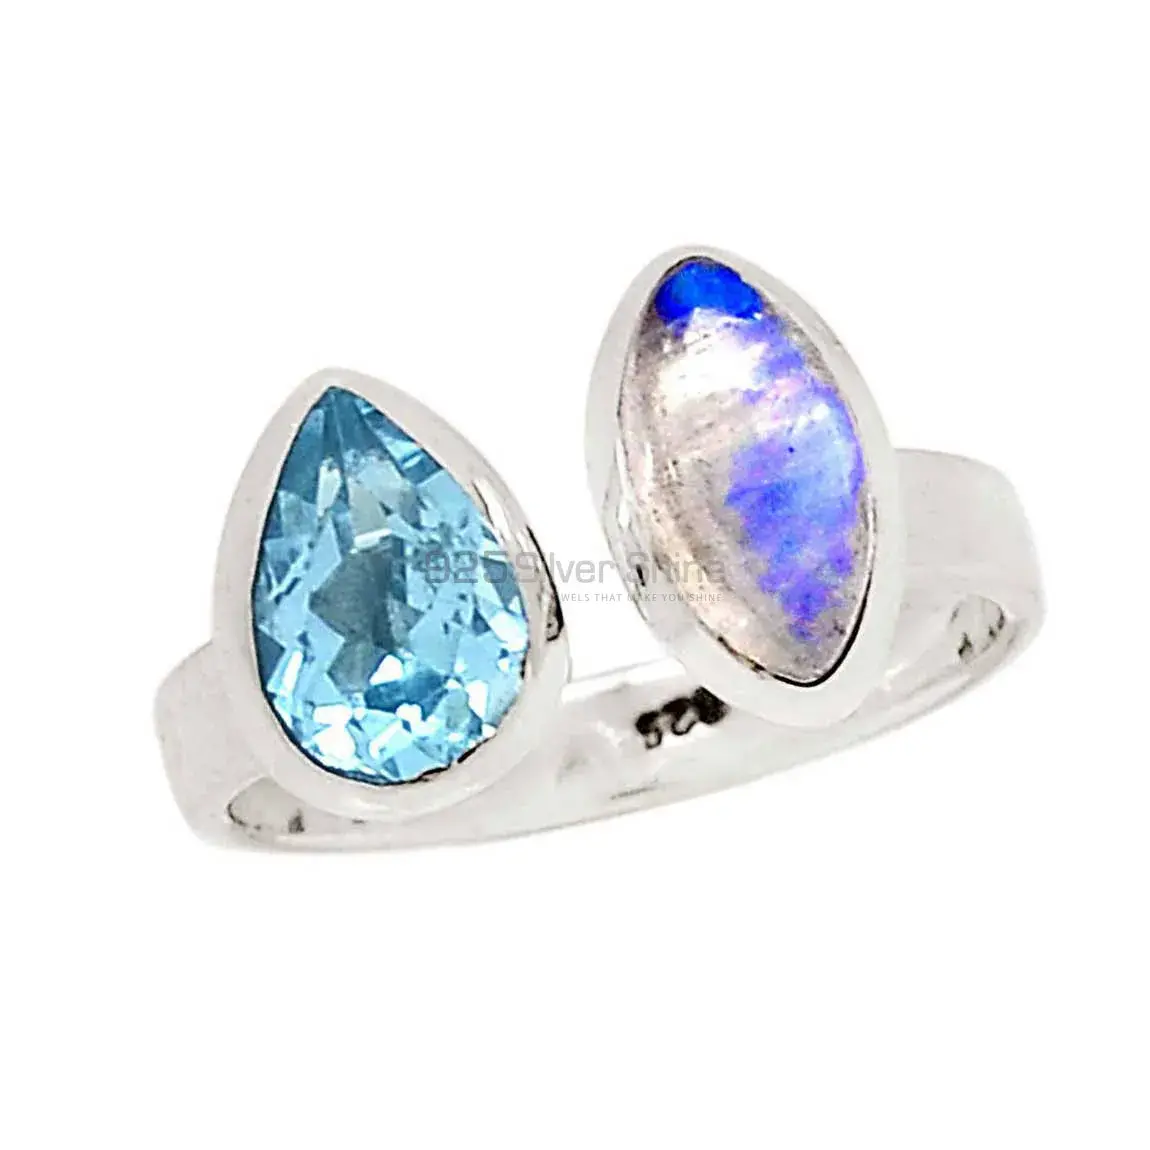 Light Weight Silver Rings In Natural Stone 925SR2240_0